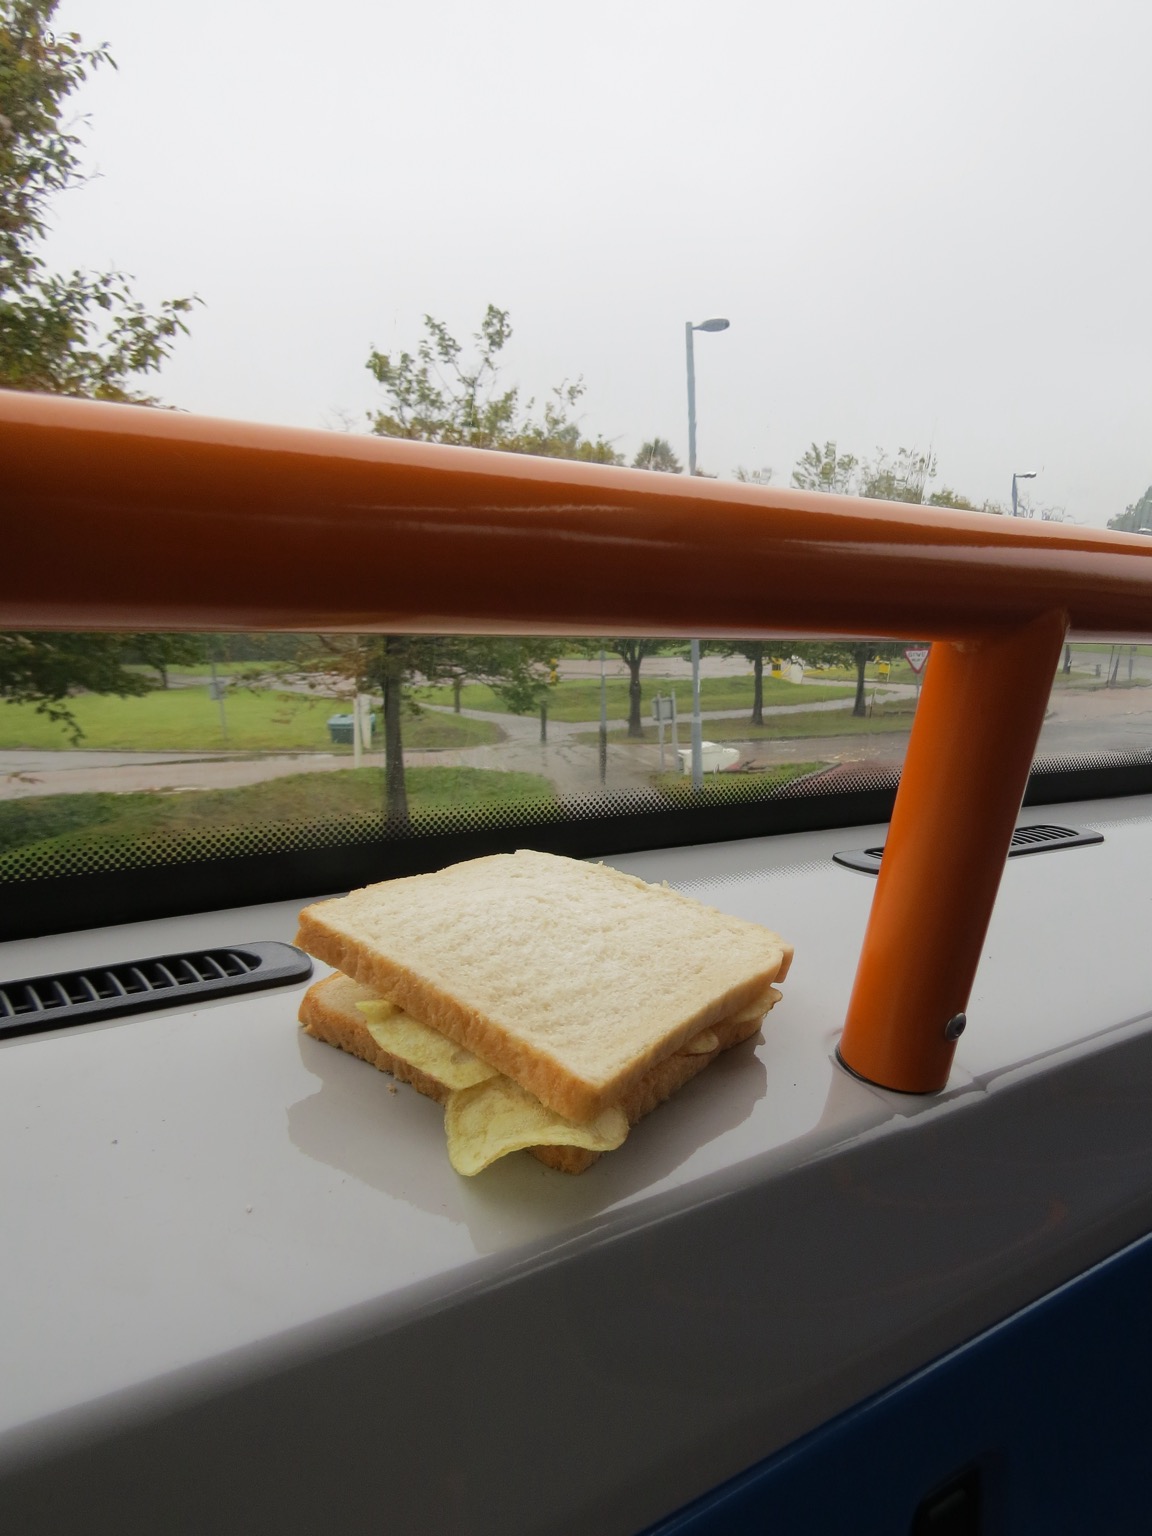 White crisp sandwich placed by the window of a bus